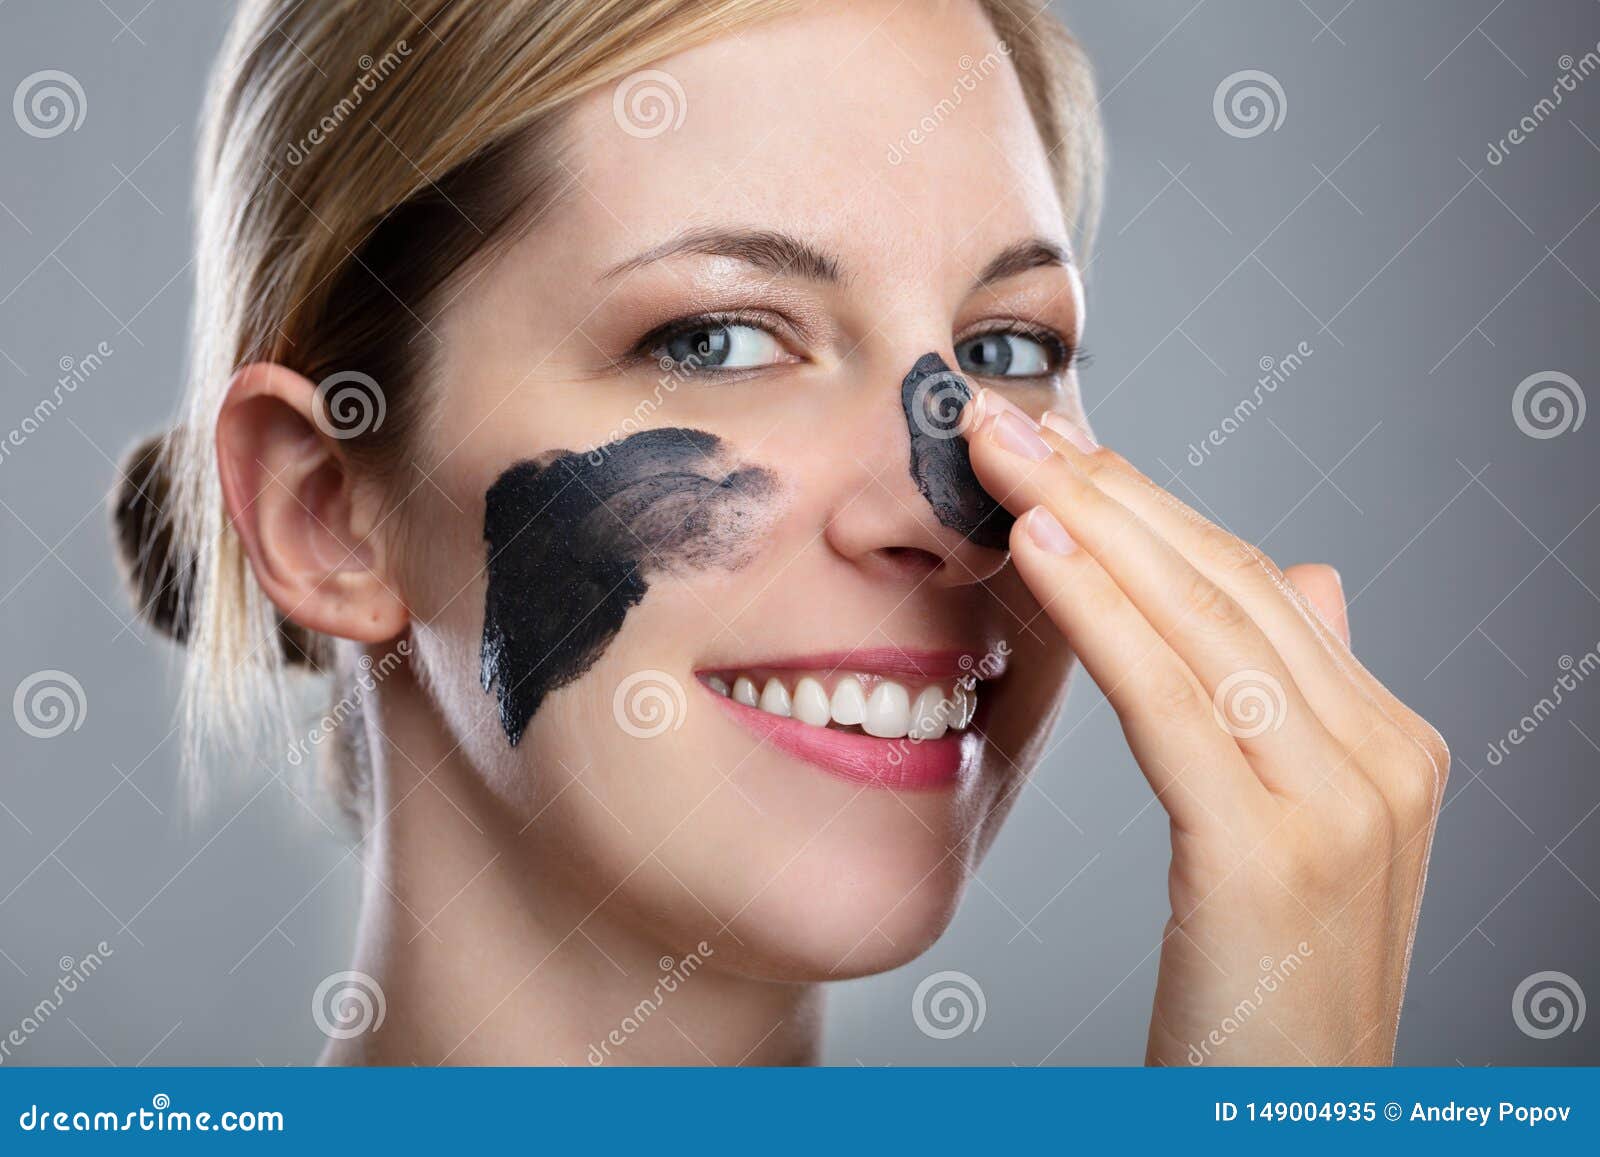 woman applying activated charcoal mask on her face